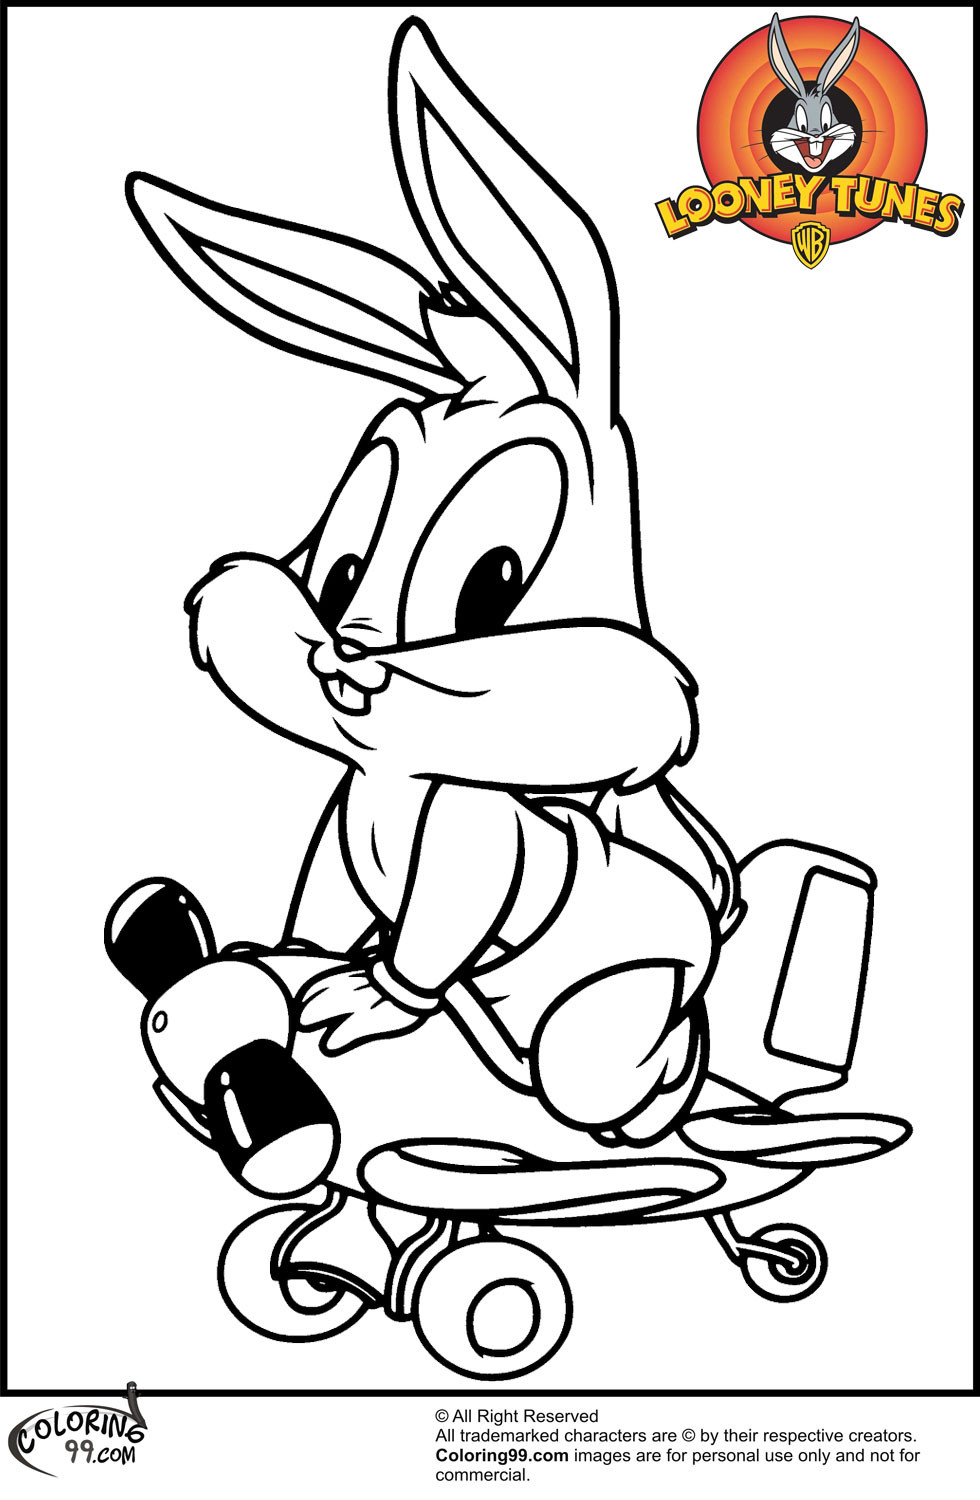 Baby Bunny Coloring Page
 Baby Bugs Bunny Coloring Pages